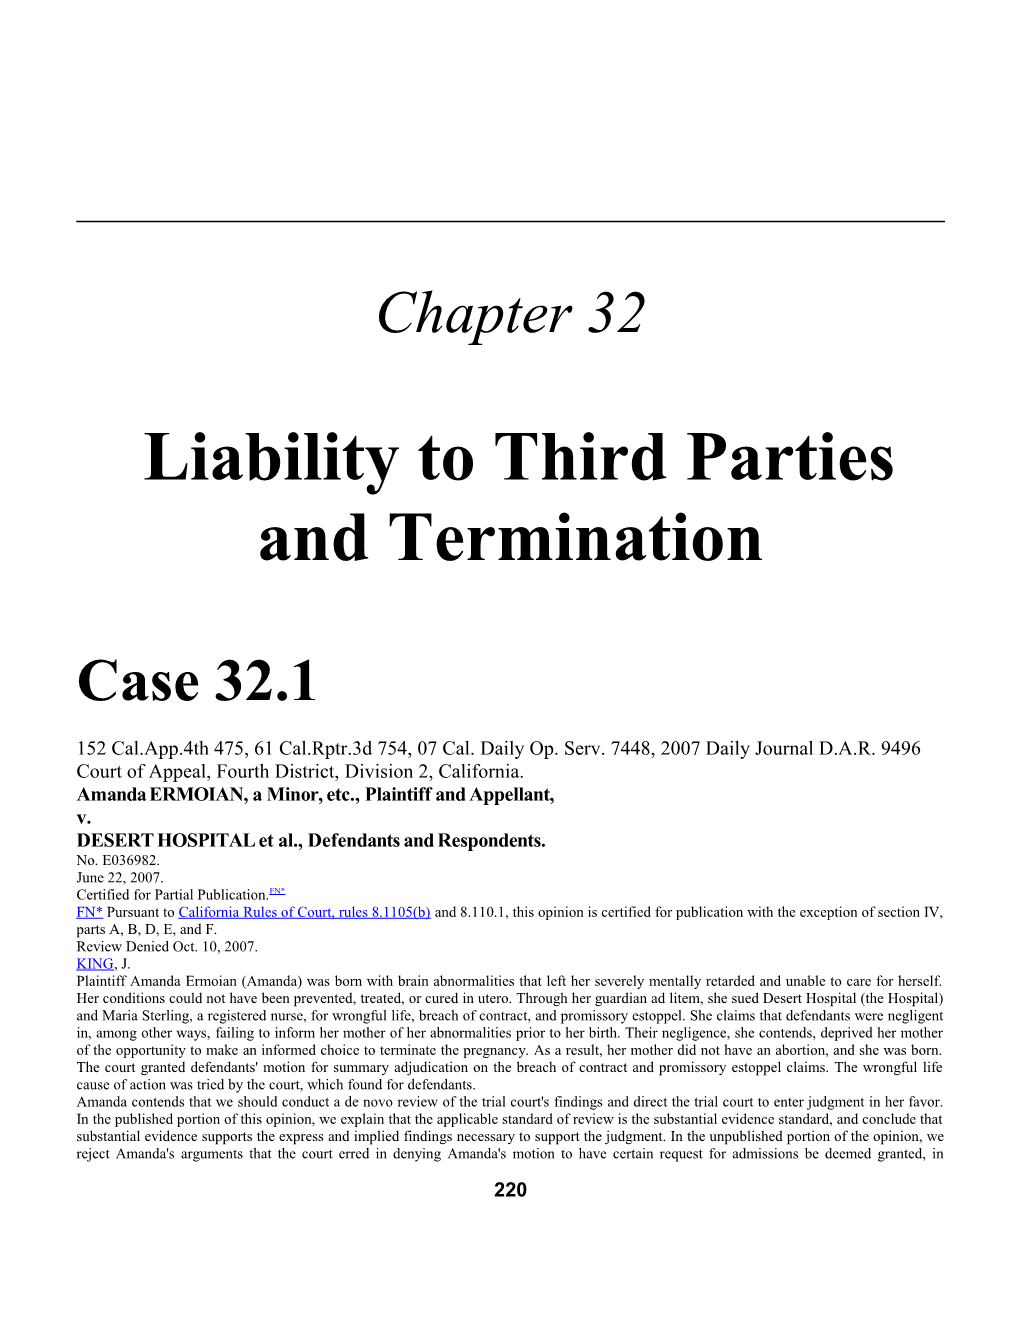 Chapter 32: Liability to Third Parties and Termination 1